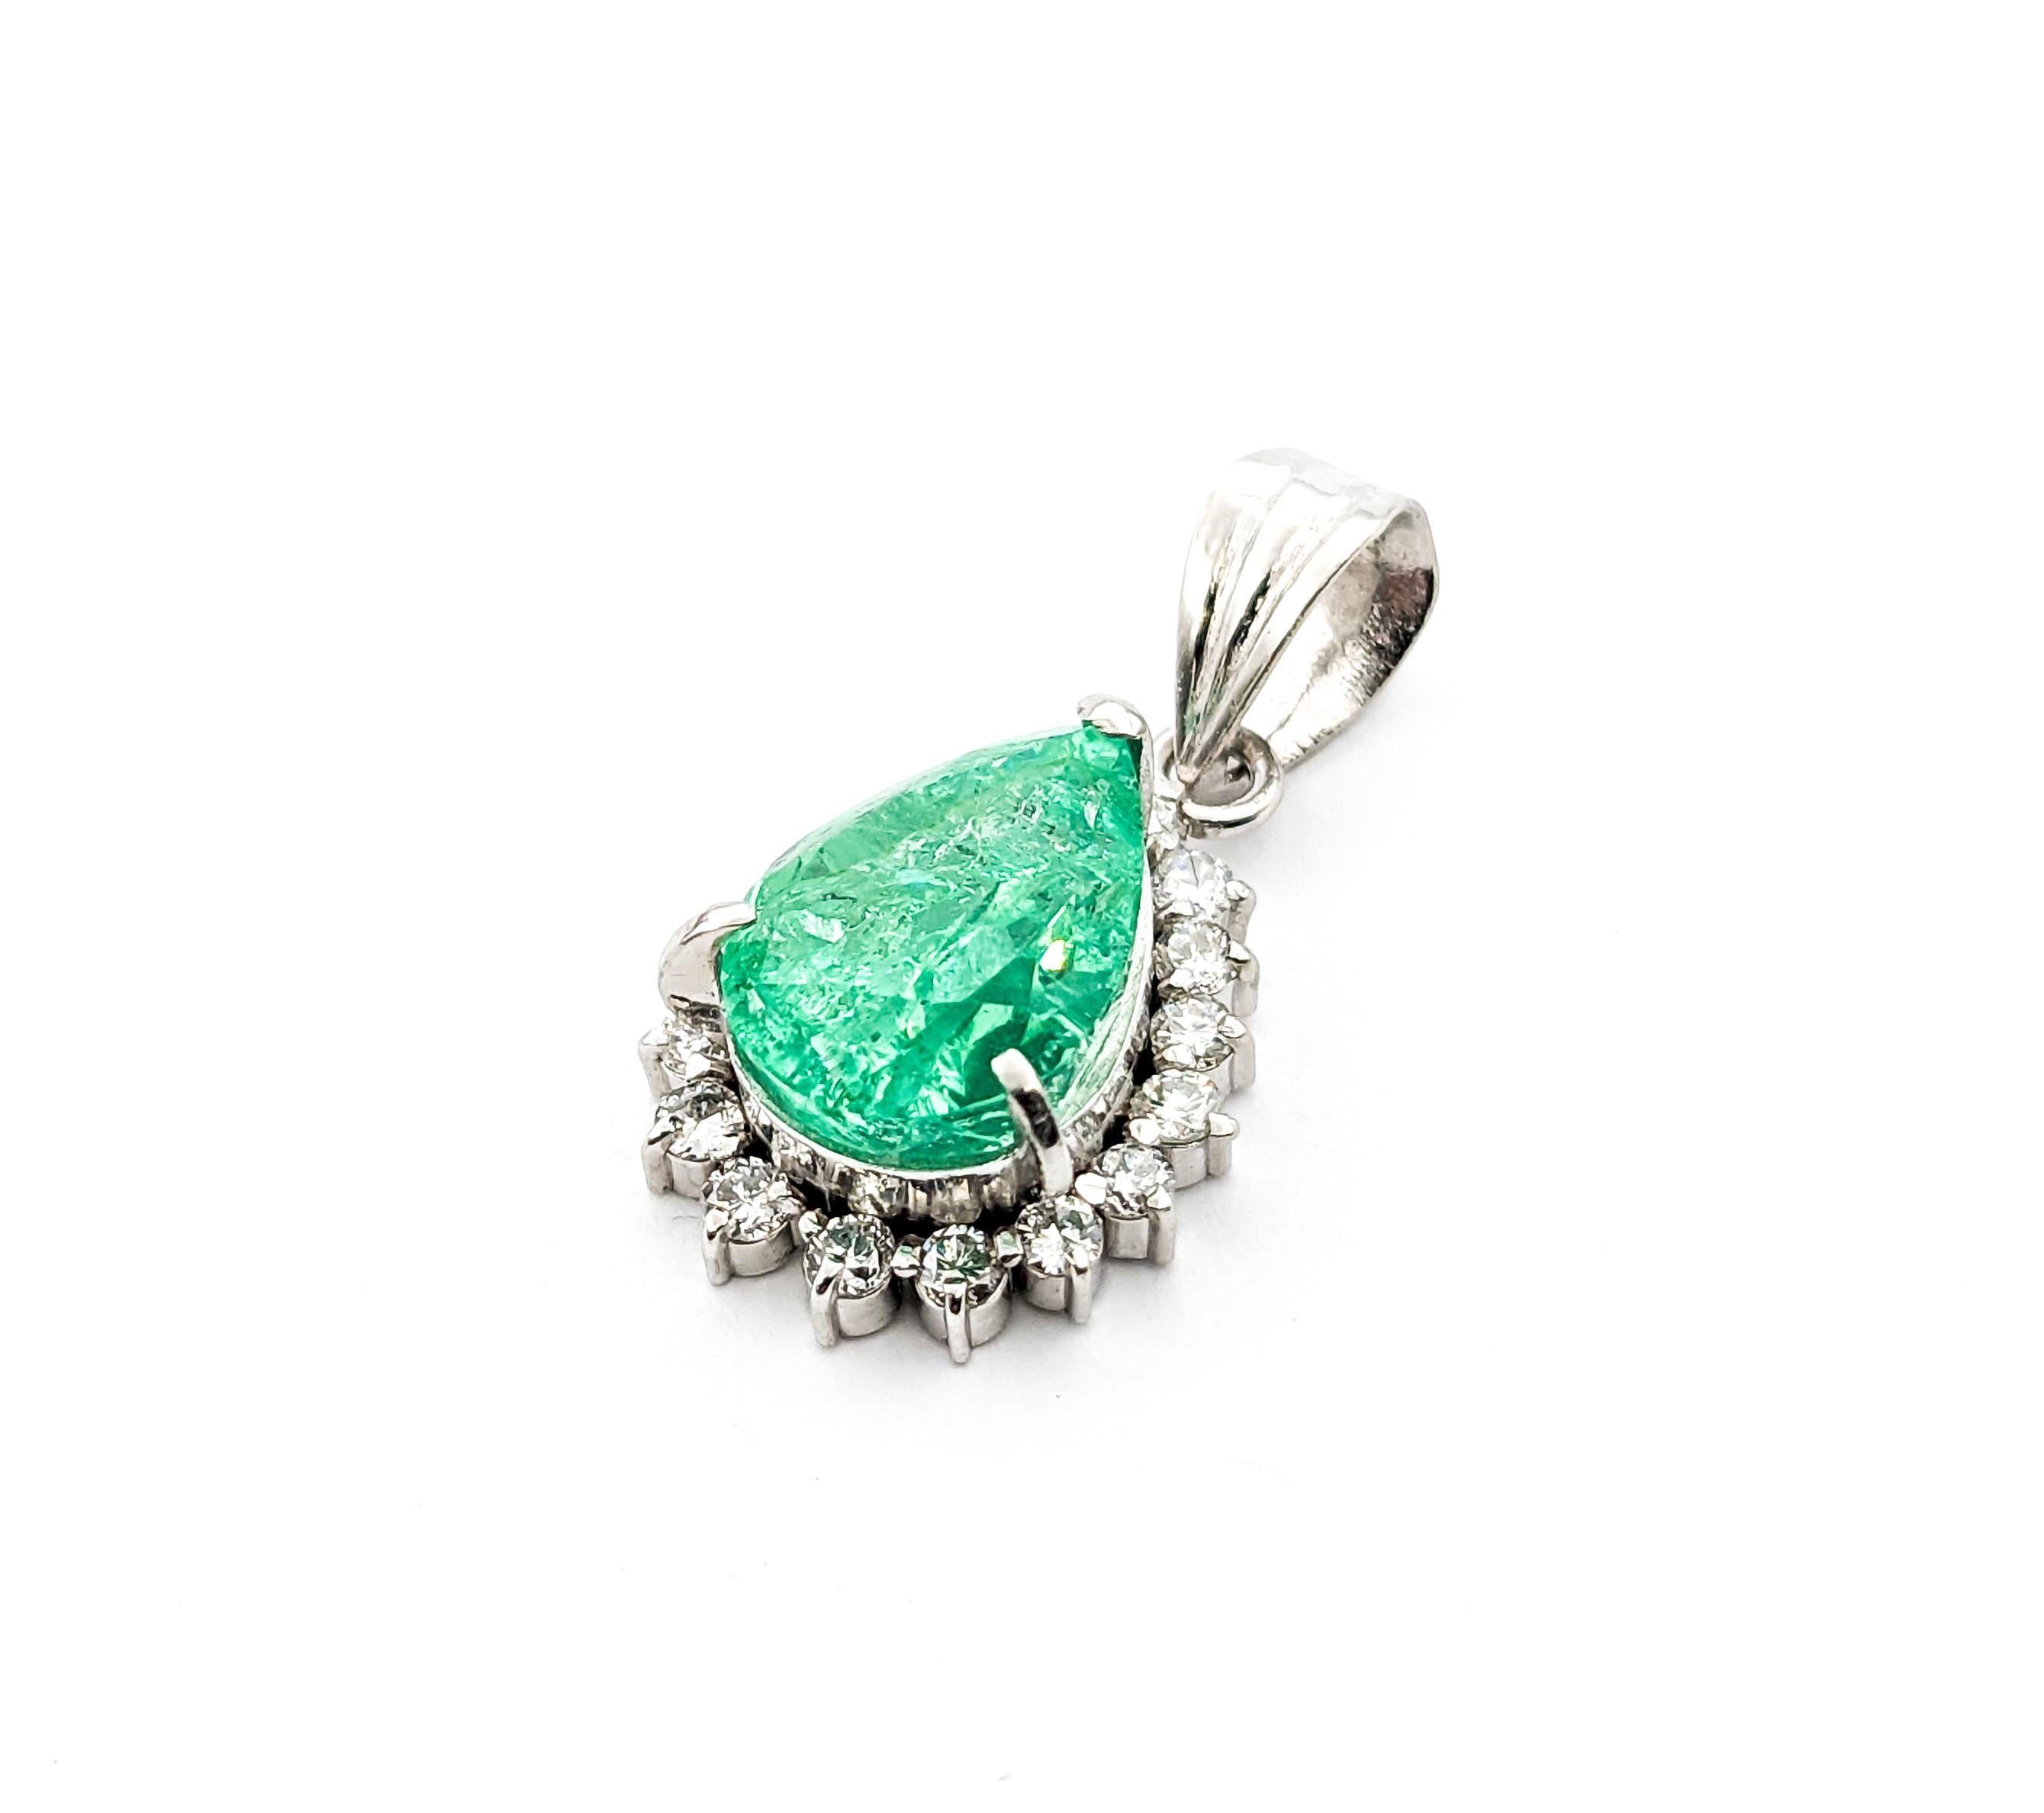 2.83ct Emerald & Diamonds Pendant In Platinum

2.83ct Emerald & Diamonds Pendant In Platinum

This elegant Emerald Pendant is finely crafted in 900 Platinum, featuring a drop design that beautifully showcases .35ctw of diamonds with SI clarity and a